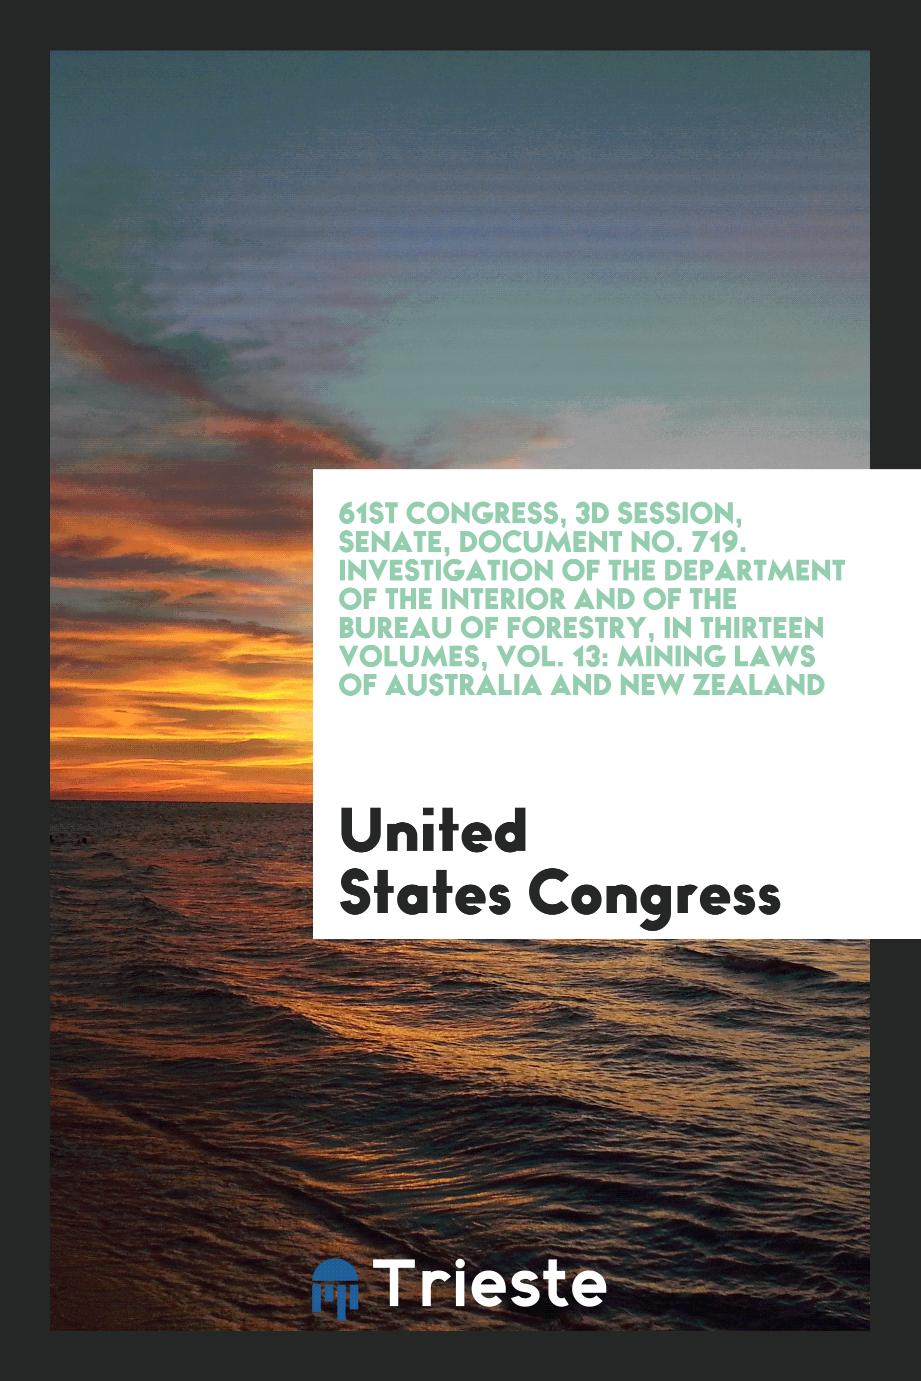 61st Congress, 3d Session, Senate, Document No. 719. Investigation of the Department of the Interior and of the Bureau of Forestry, in Thirteen Volumes, Vol. 13: Mining Laws of Australia and New Zealand